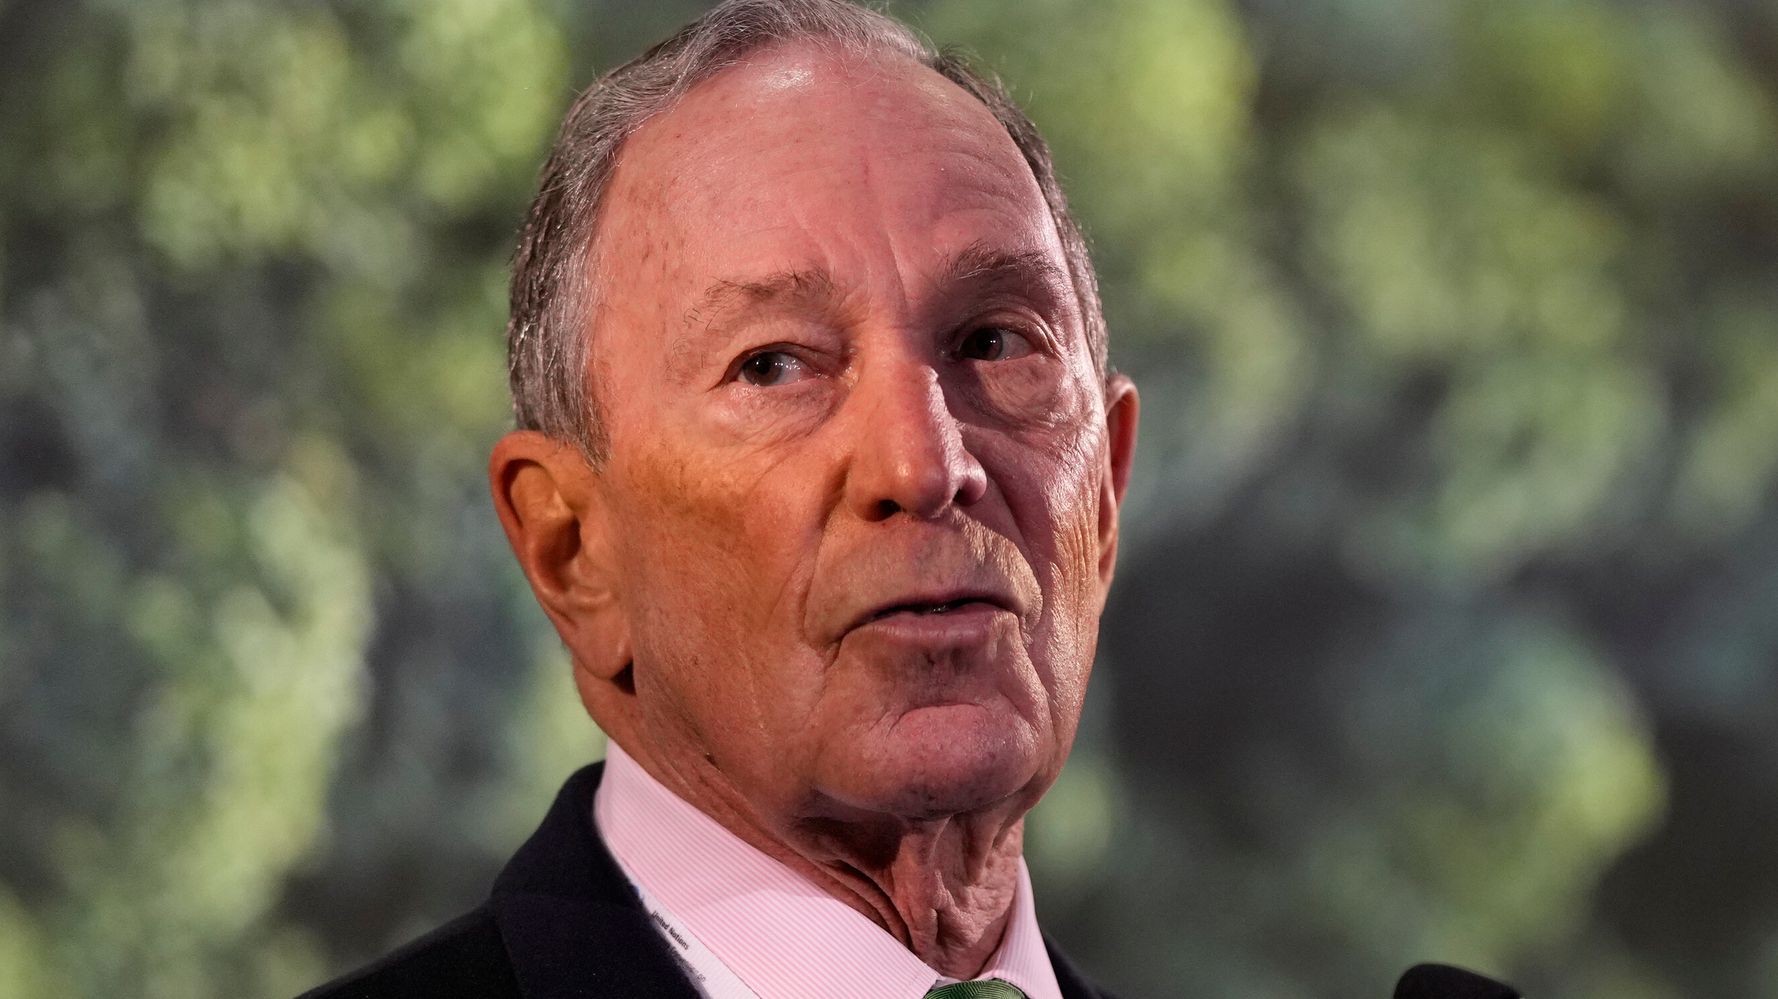 Man Arrested After Allegedly Kidnapping Michael Bloomberg’s Housekeeper at Gunpoint